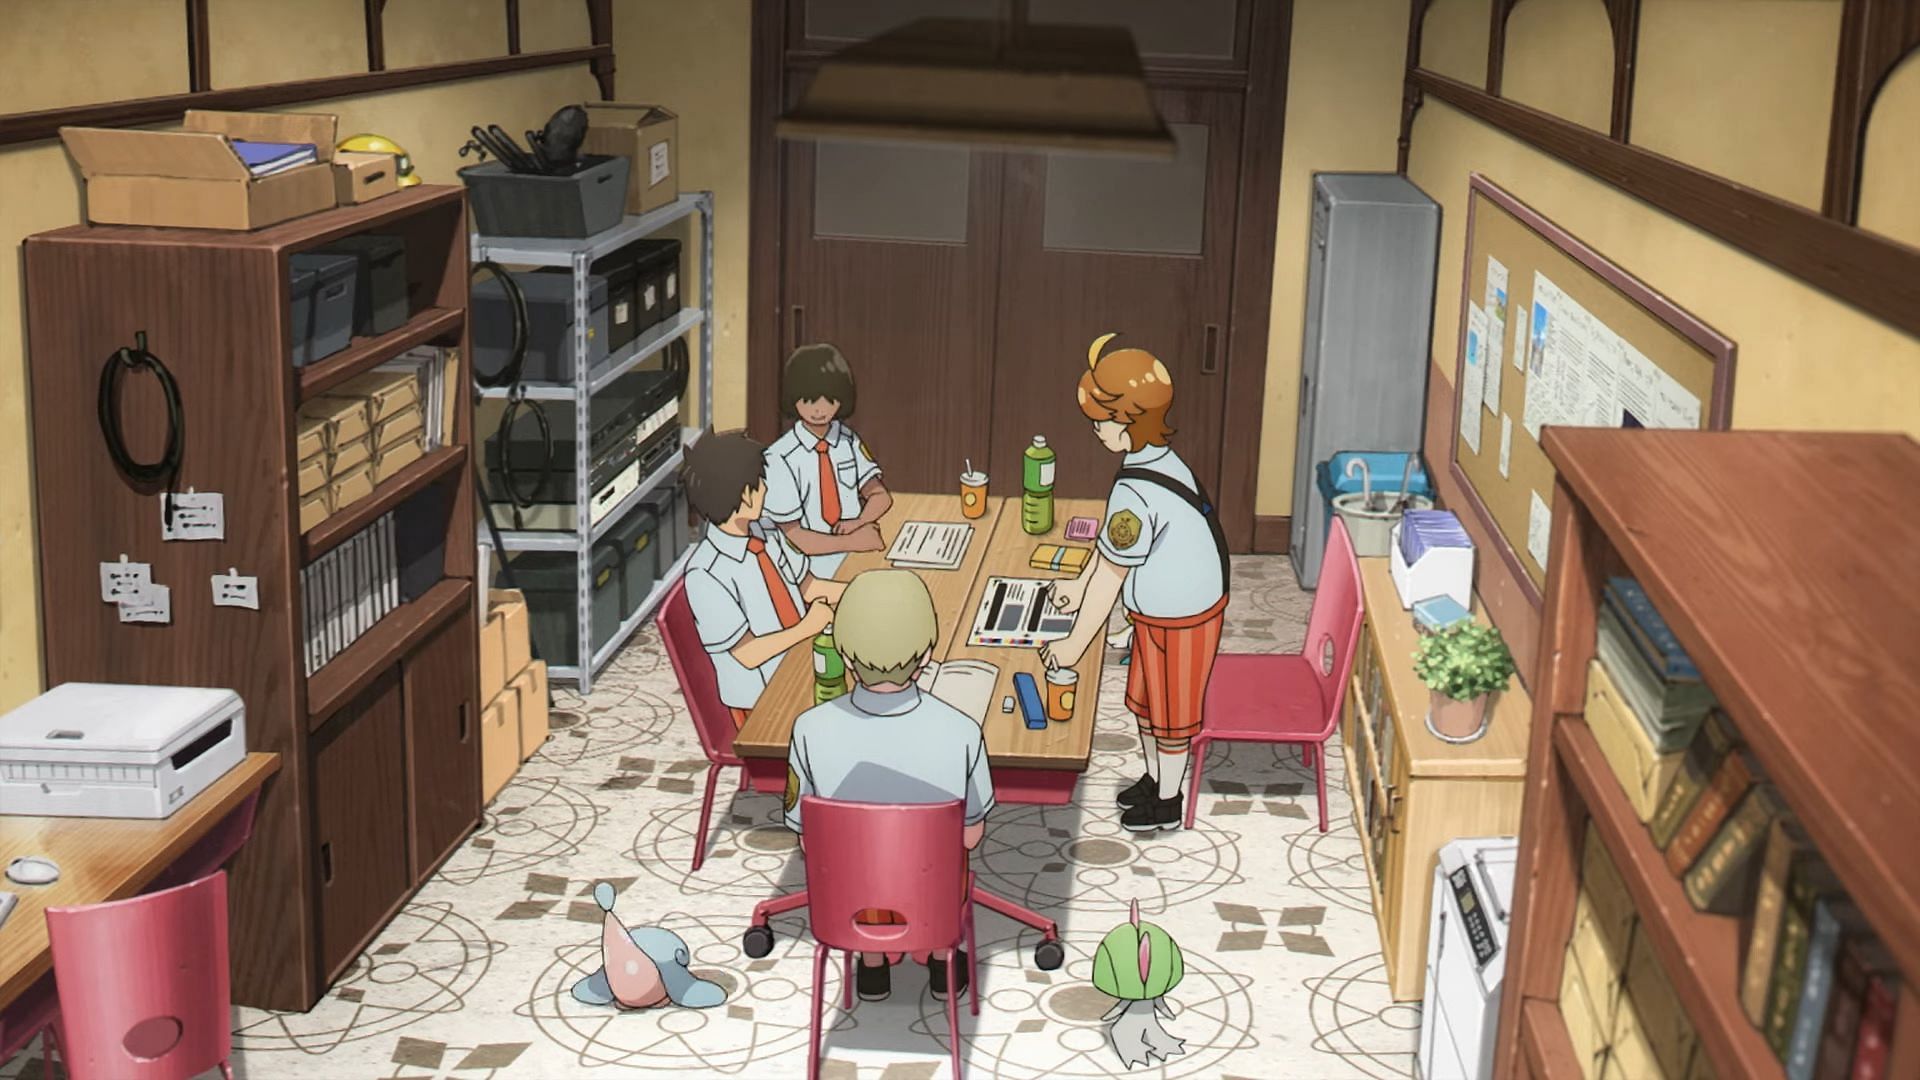 Naranja Academy&#039;s news department meets in Pokemon: Paldean Winds Episode 3 (Image via The Pokemon Company)